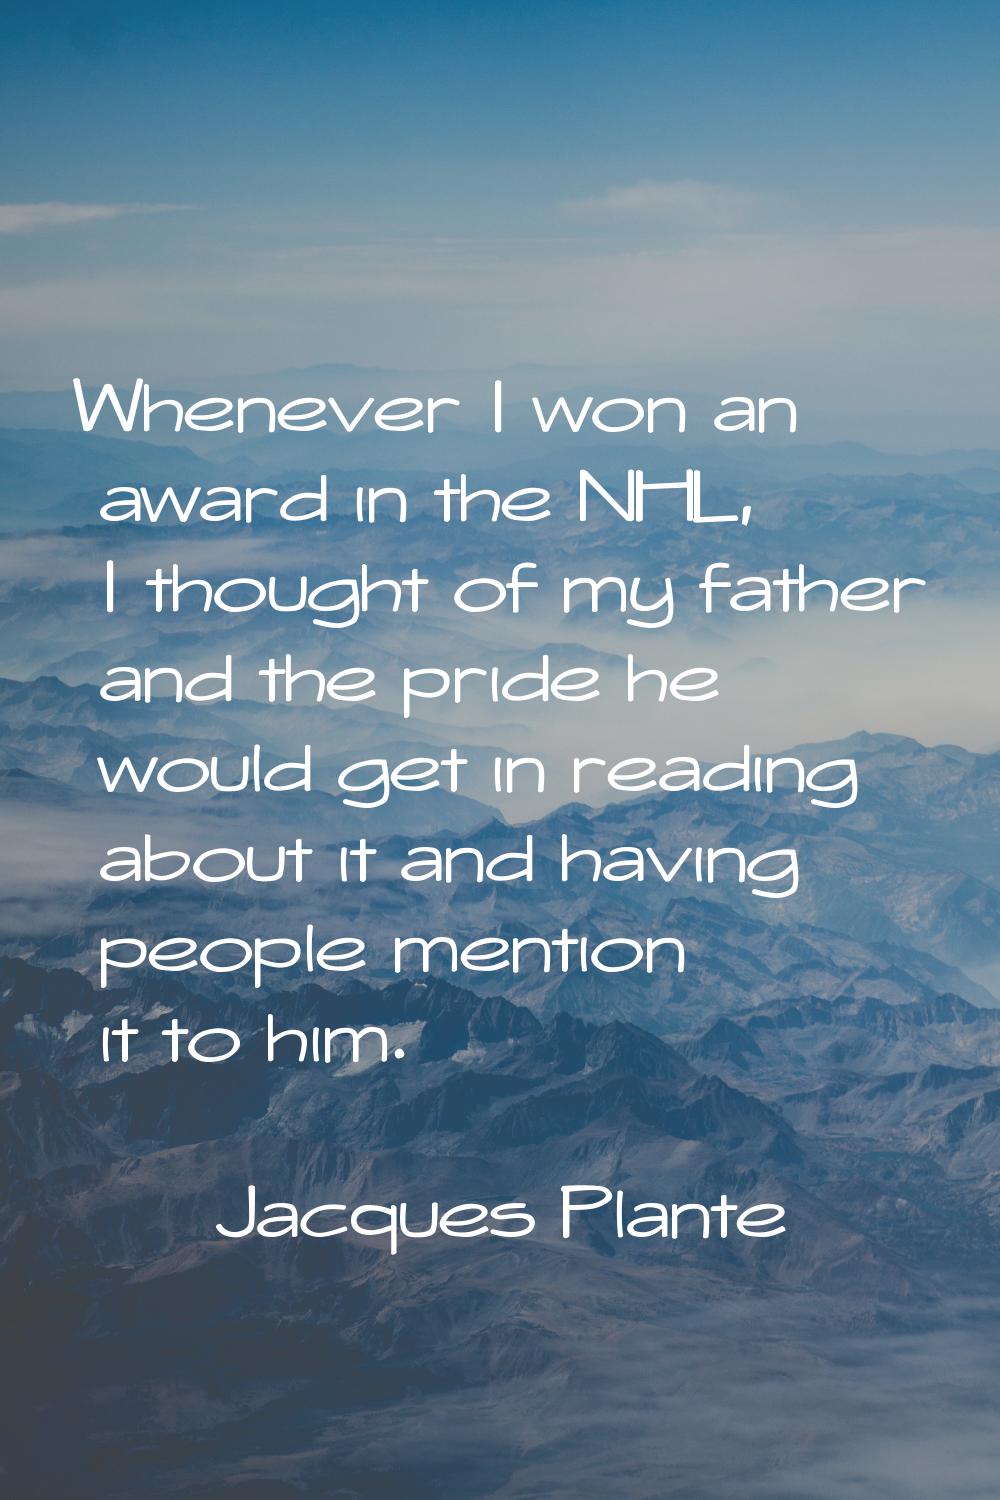 Whenever I won an award in the NHL, I thought of my father and the pride he would get in reading ab